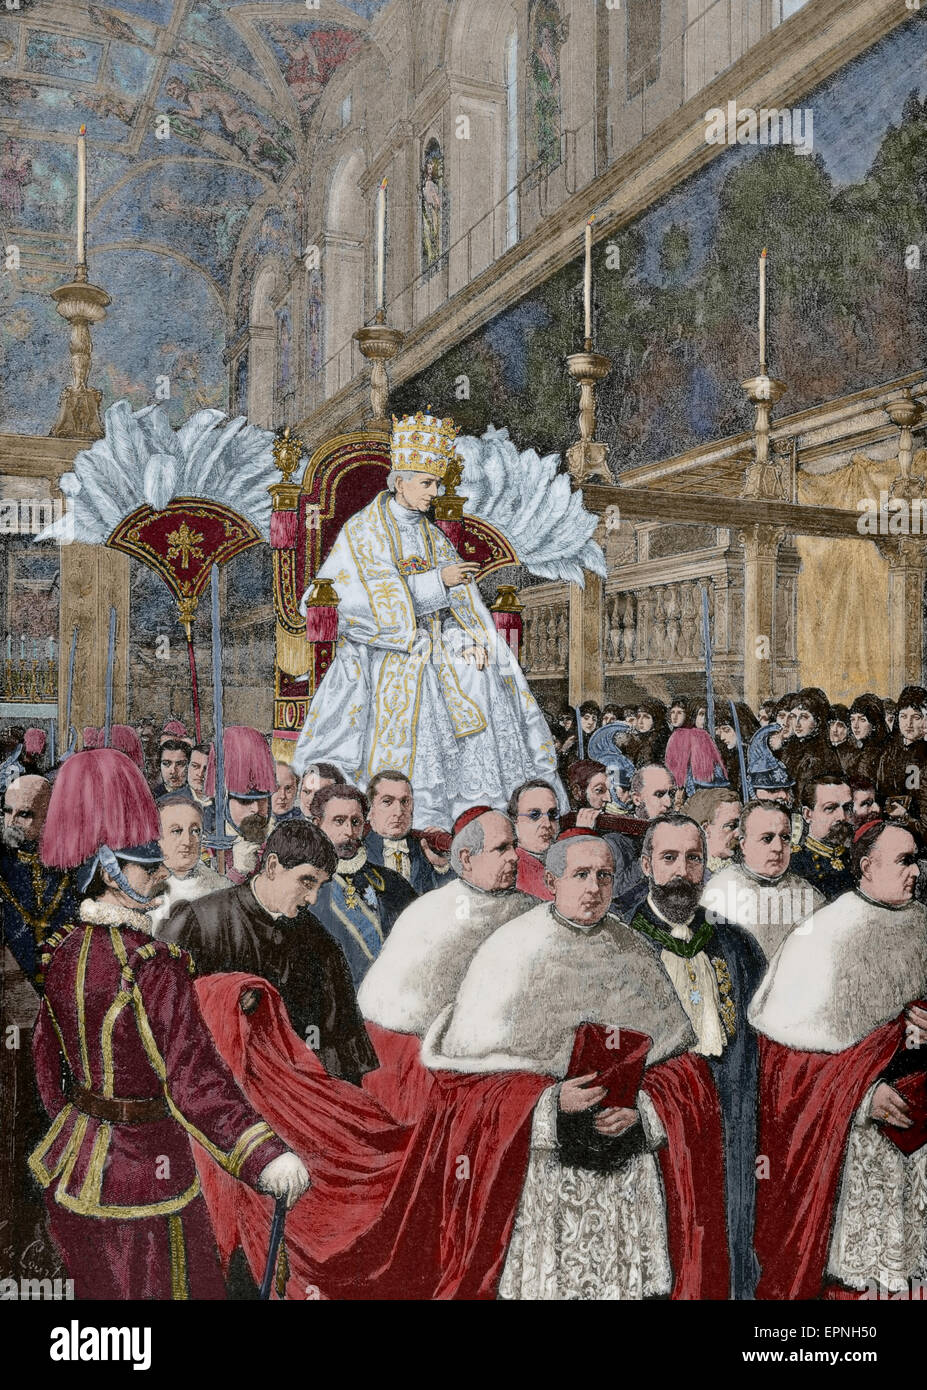 Leo XIII (1810-1903). Italian Pope (1878-1903), named Vincenzo Gioacchino Pecci. Pope Leo XIII giving a blessing Urbi et Orbi, after the Pontifical Mass from the gestatorial chair. Engraving in The Iberian Illustration, 1888. Colored. Stock Photo